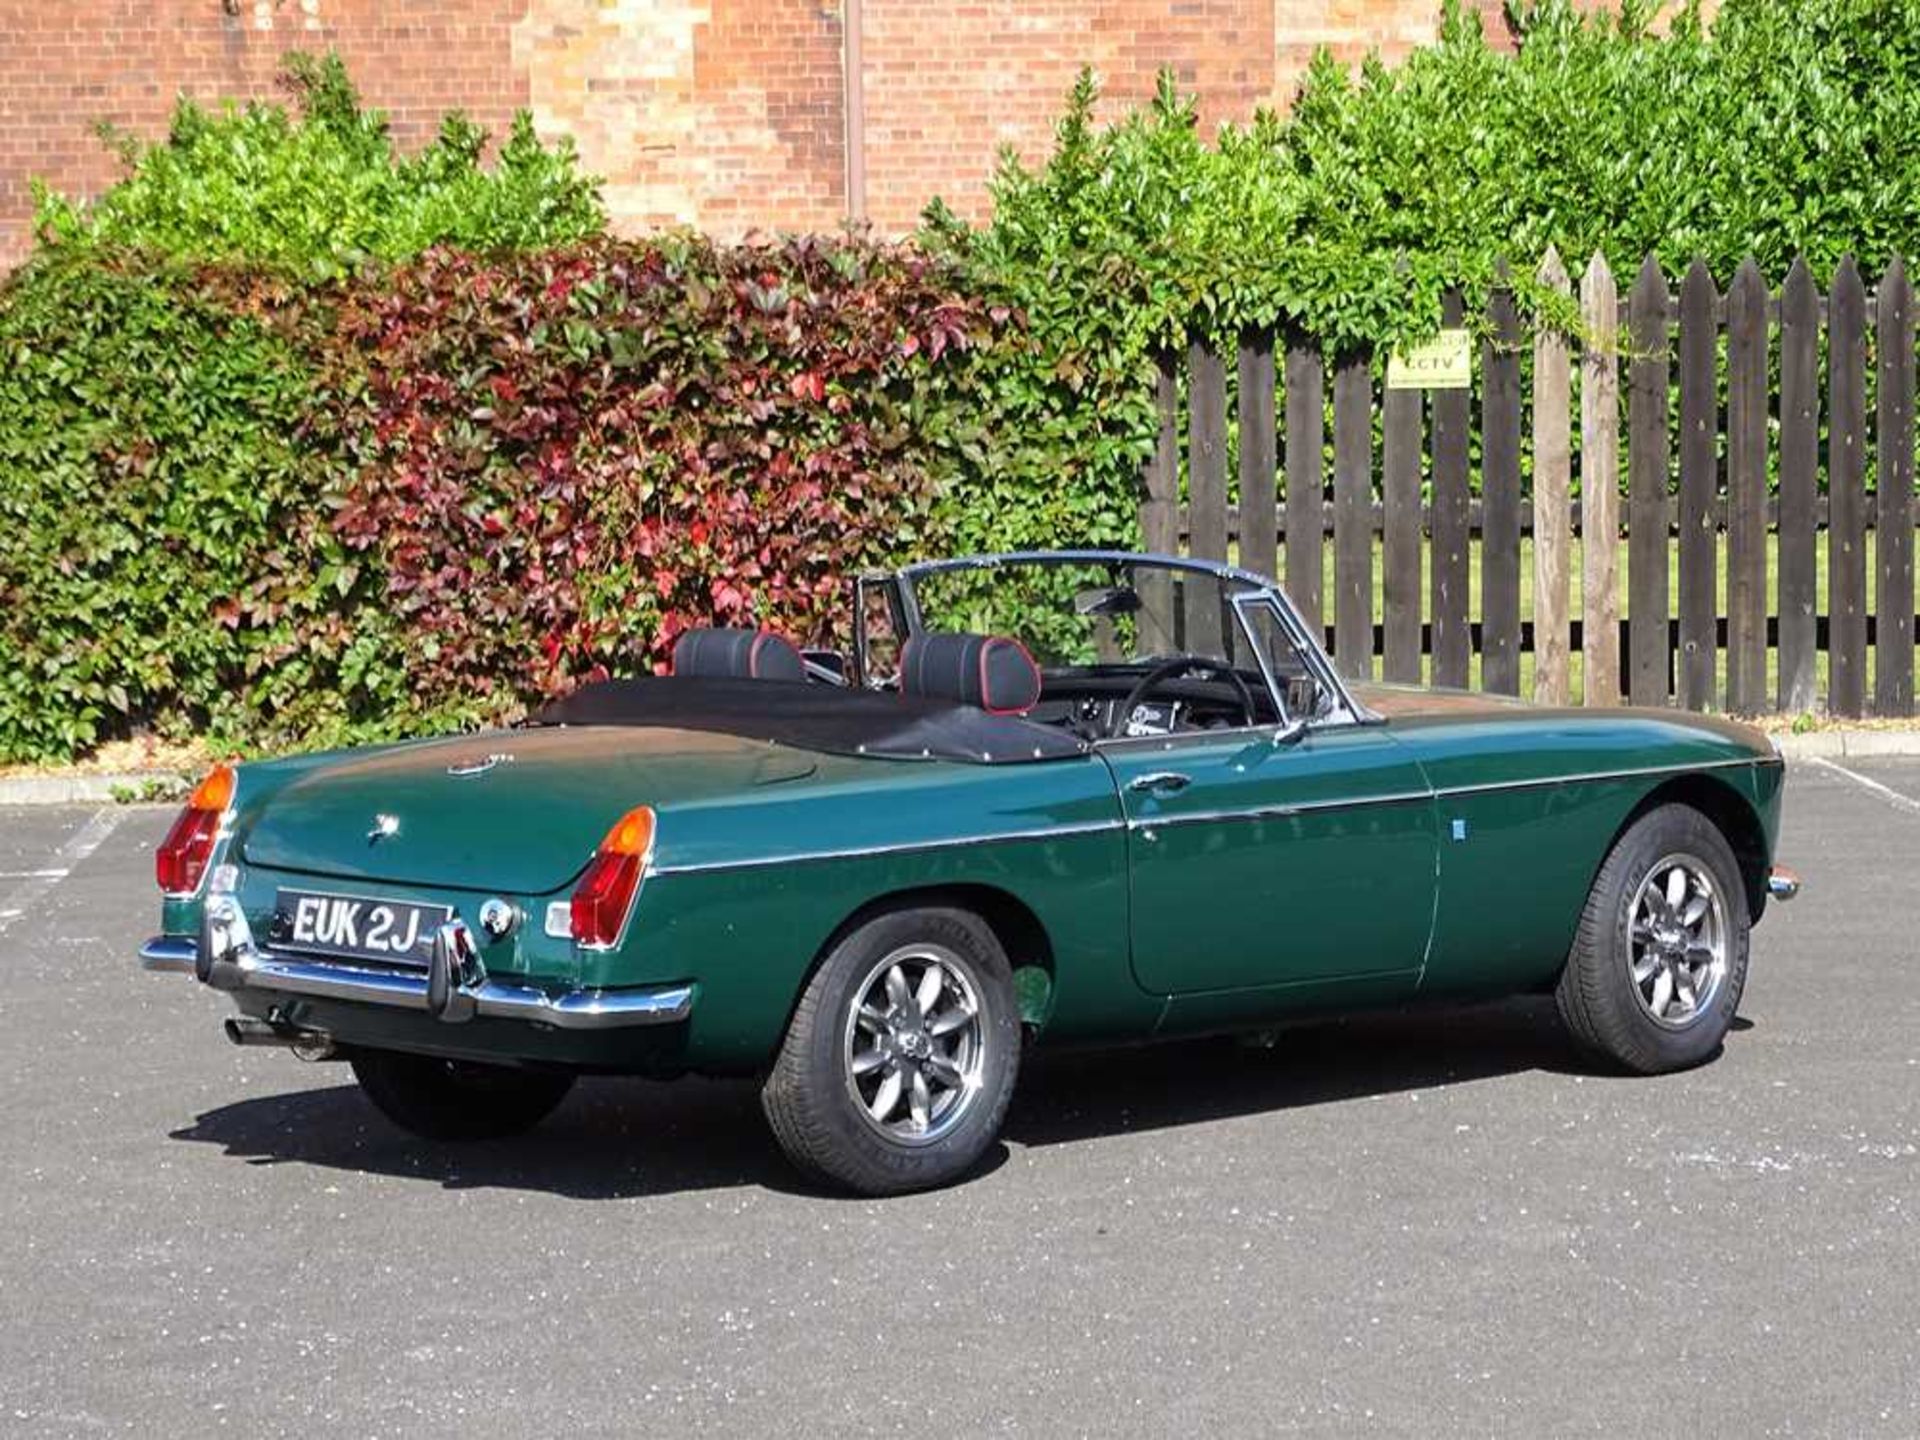 1971 MG B Roadster Restored at a cost of c.£33,000 - Image 10 of 43